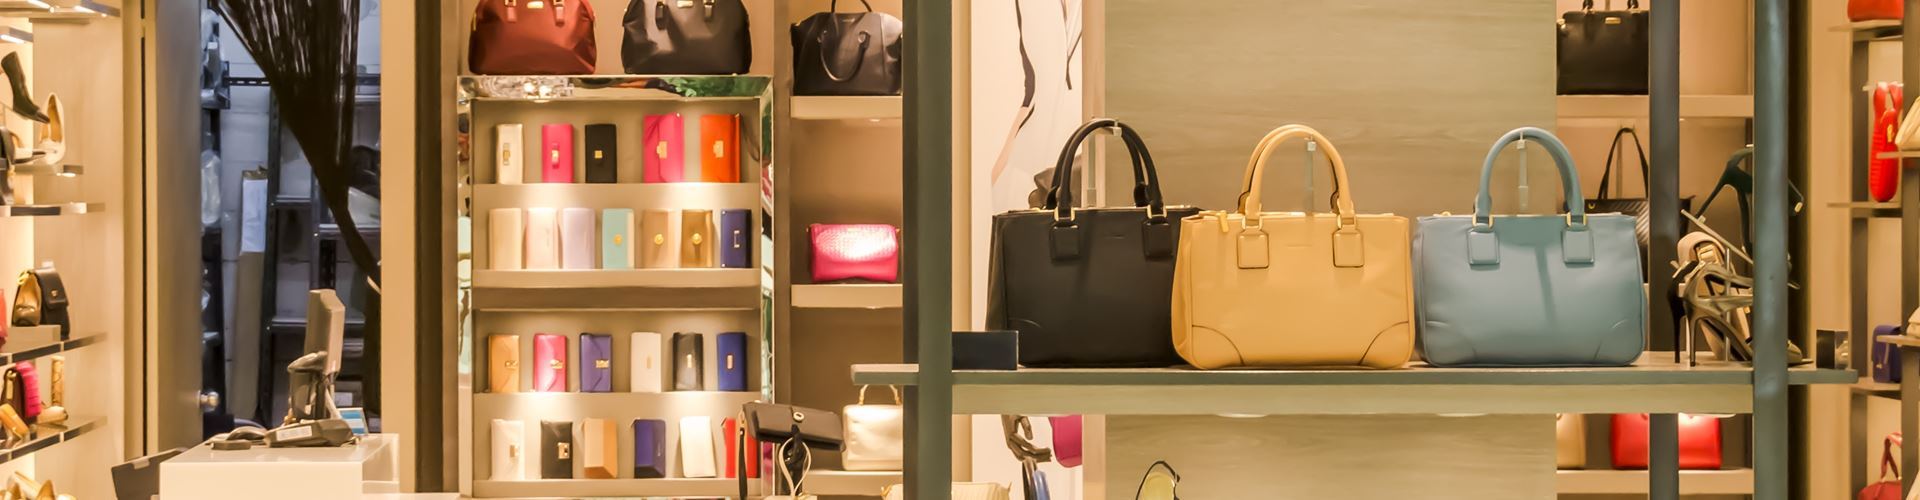 How to Get into Luxury Brand Management | LSBF Blog